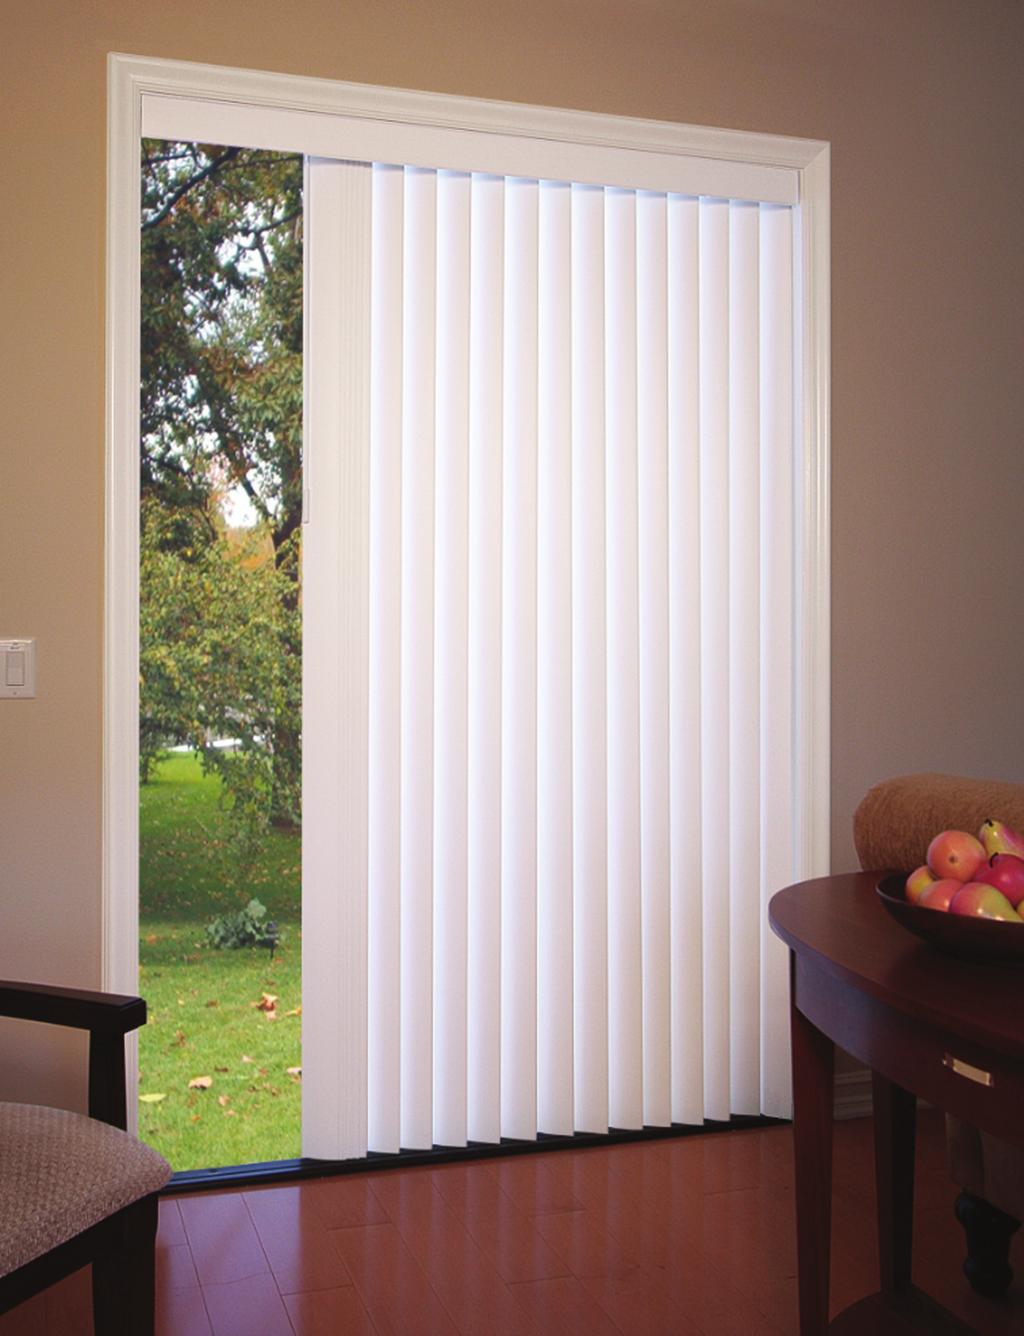 3½-inch Vertical Blinds With Reversible Metal Headrail Room-darkening louvers offer privacy & BENEFITS: &FEATURES light control Complete child-safe product Self-aligning louver rotation system Direct